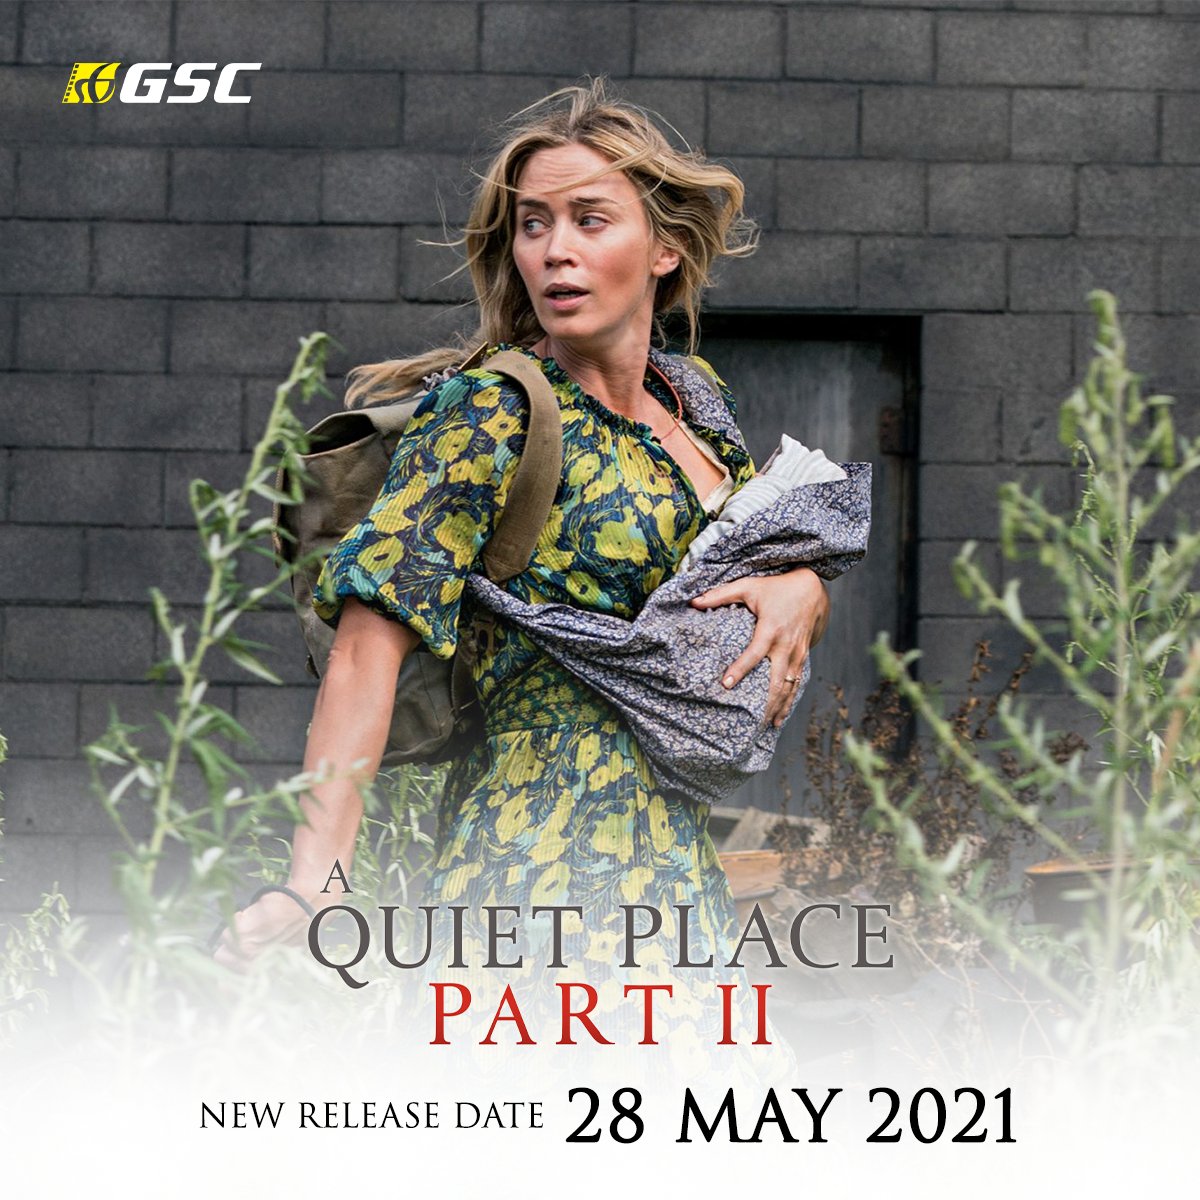 Gsc Hellowecan Director Johnkrasinski Baru Announce A Quiet Place Part 2 Will Be Coming Earlier Initial Date September 21 New Date 28 May 21 Yay Can T Wait Aquietplace2 T Co Nqeyv46cjh